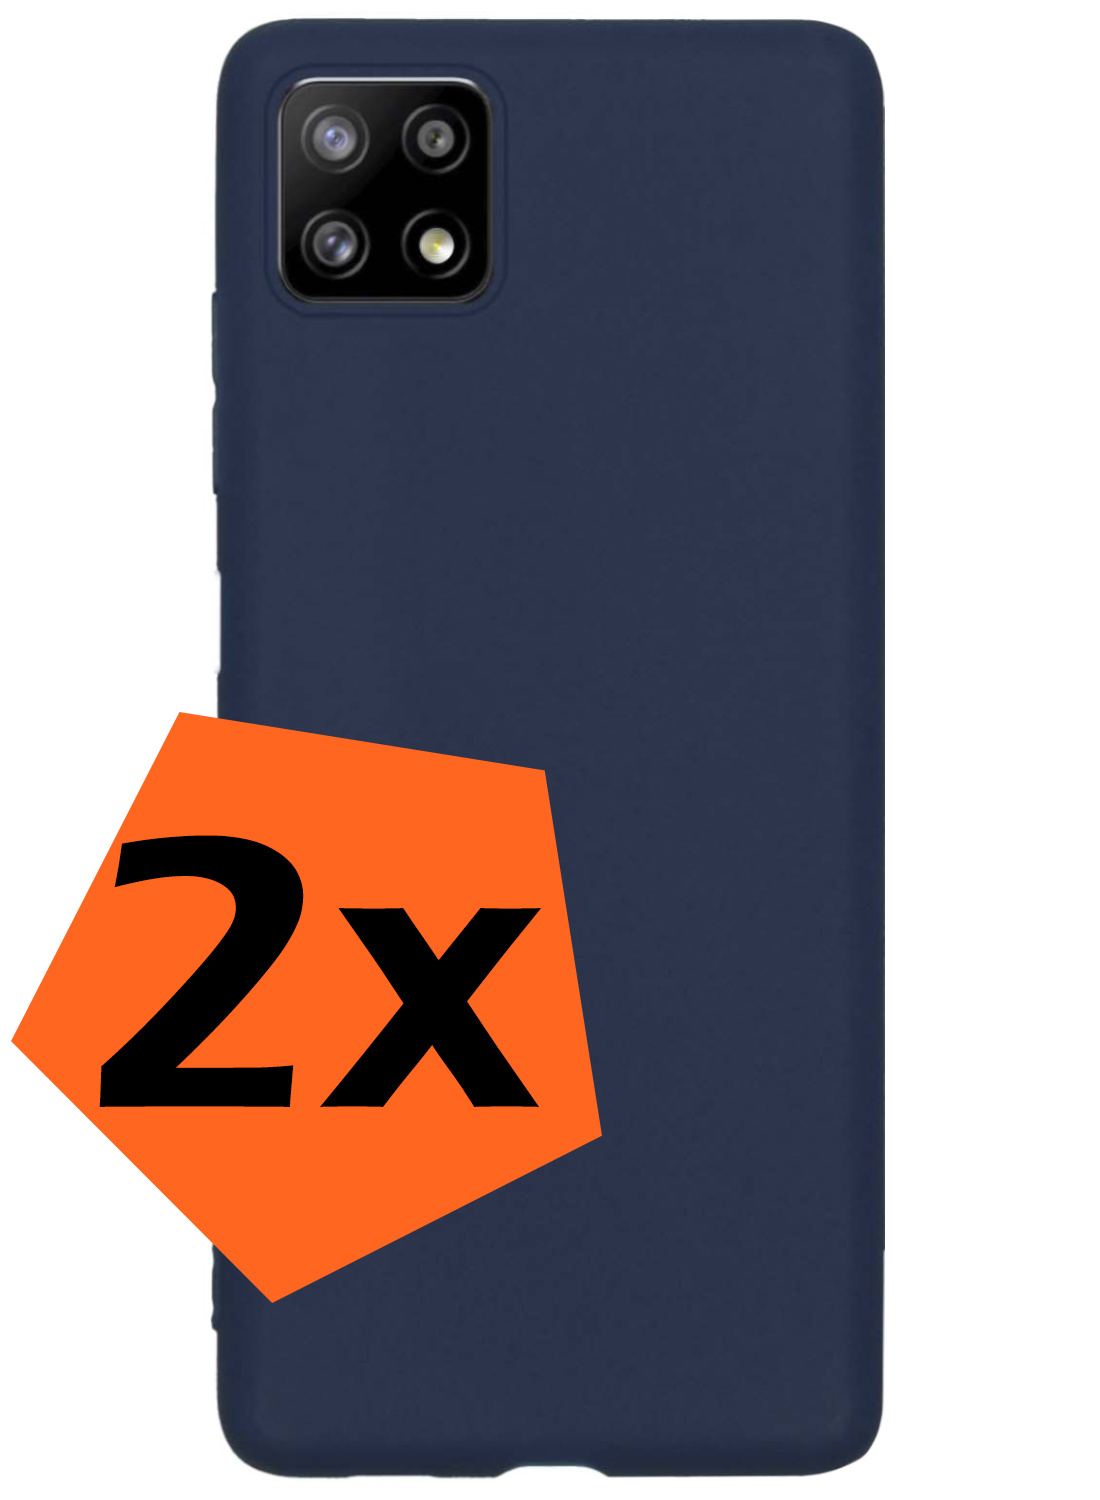 Nomfy Samsung Galaxy M22 Hoesje Siliconen Cover Hoes Case - Samsung Galaxy M22 Hoes Siliconen Hoesje Back Cover - Donkerblauw - 2 Stuks